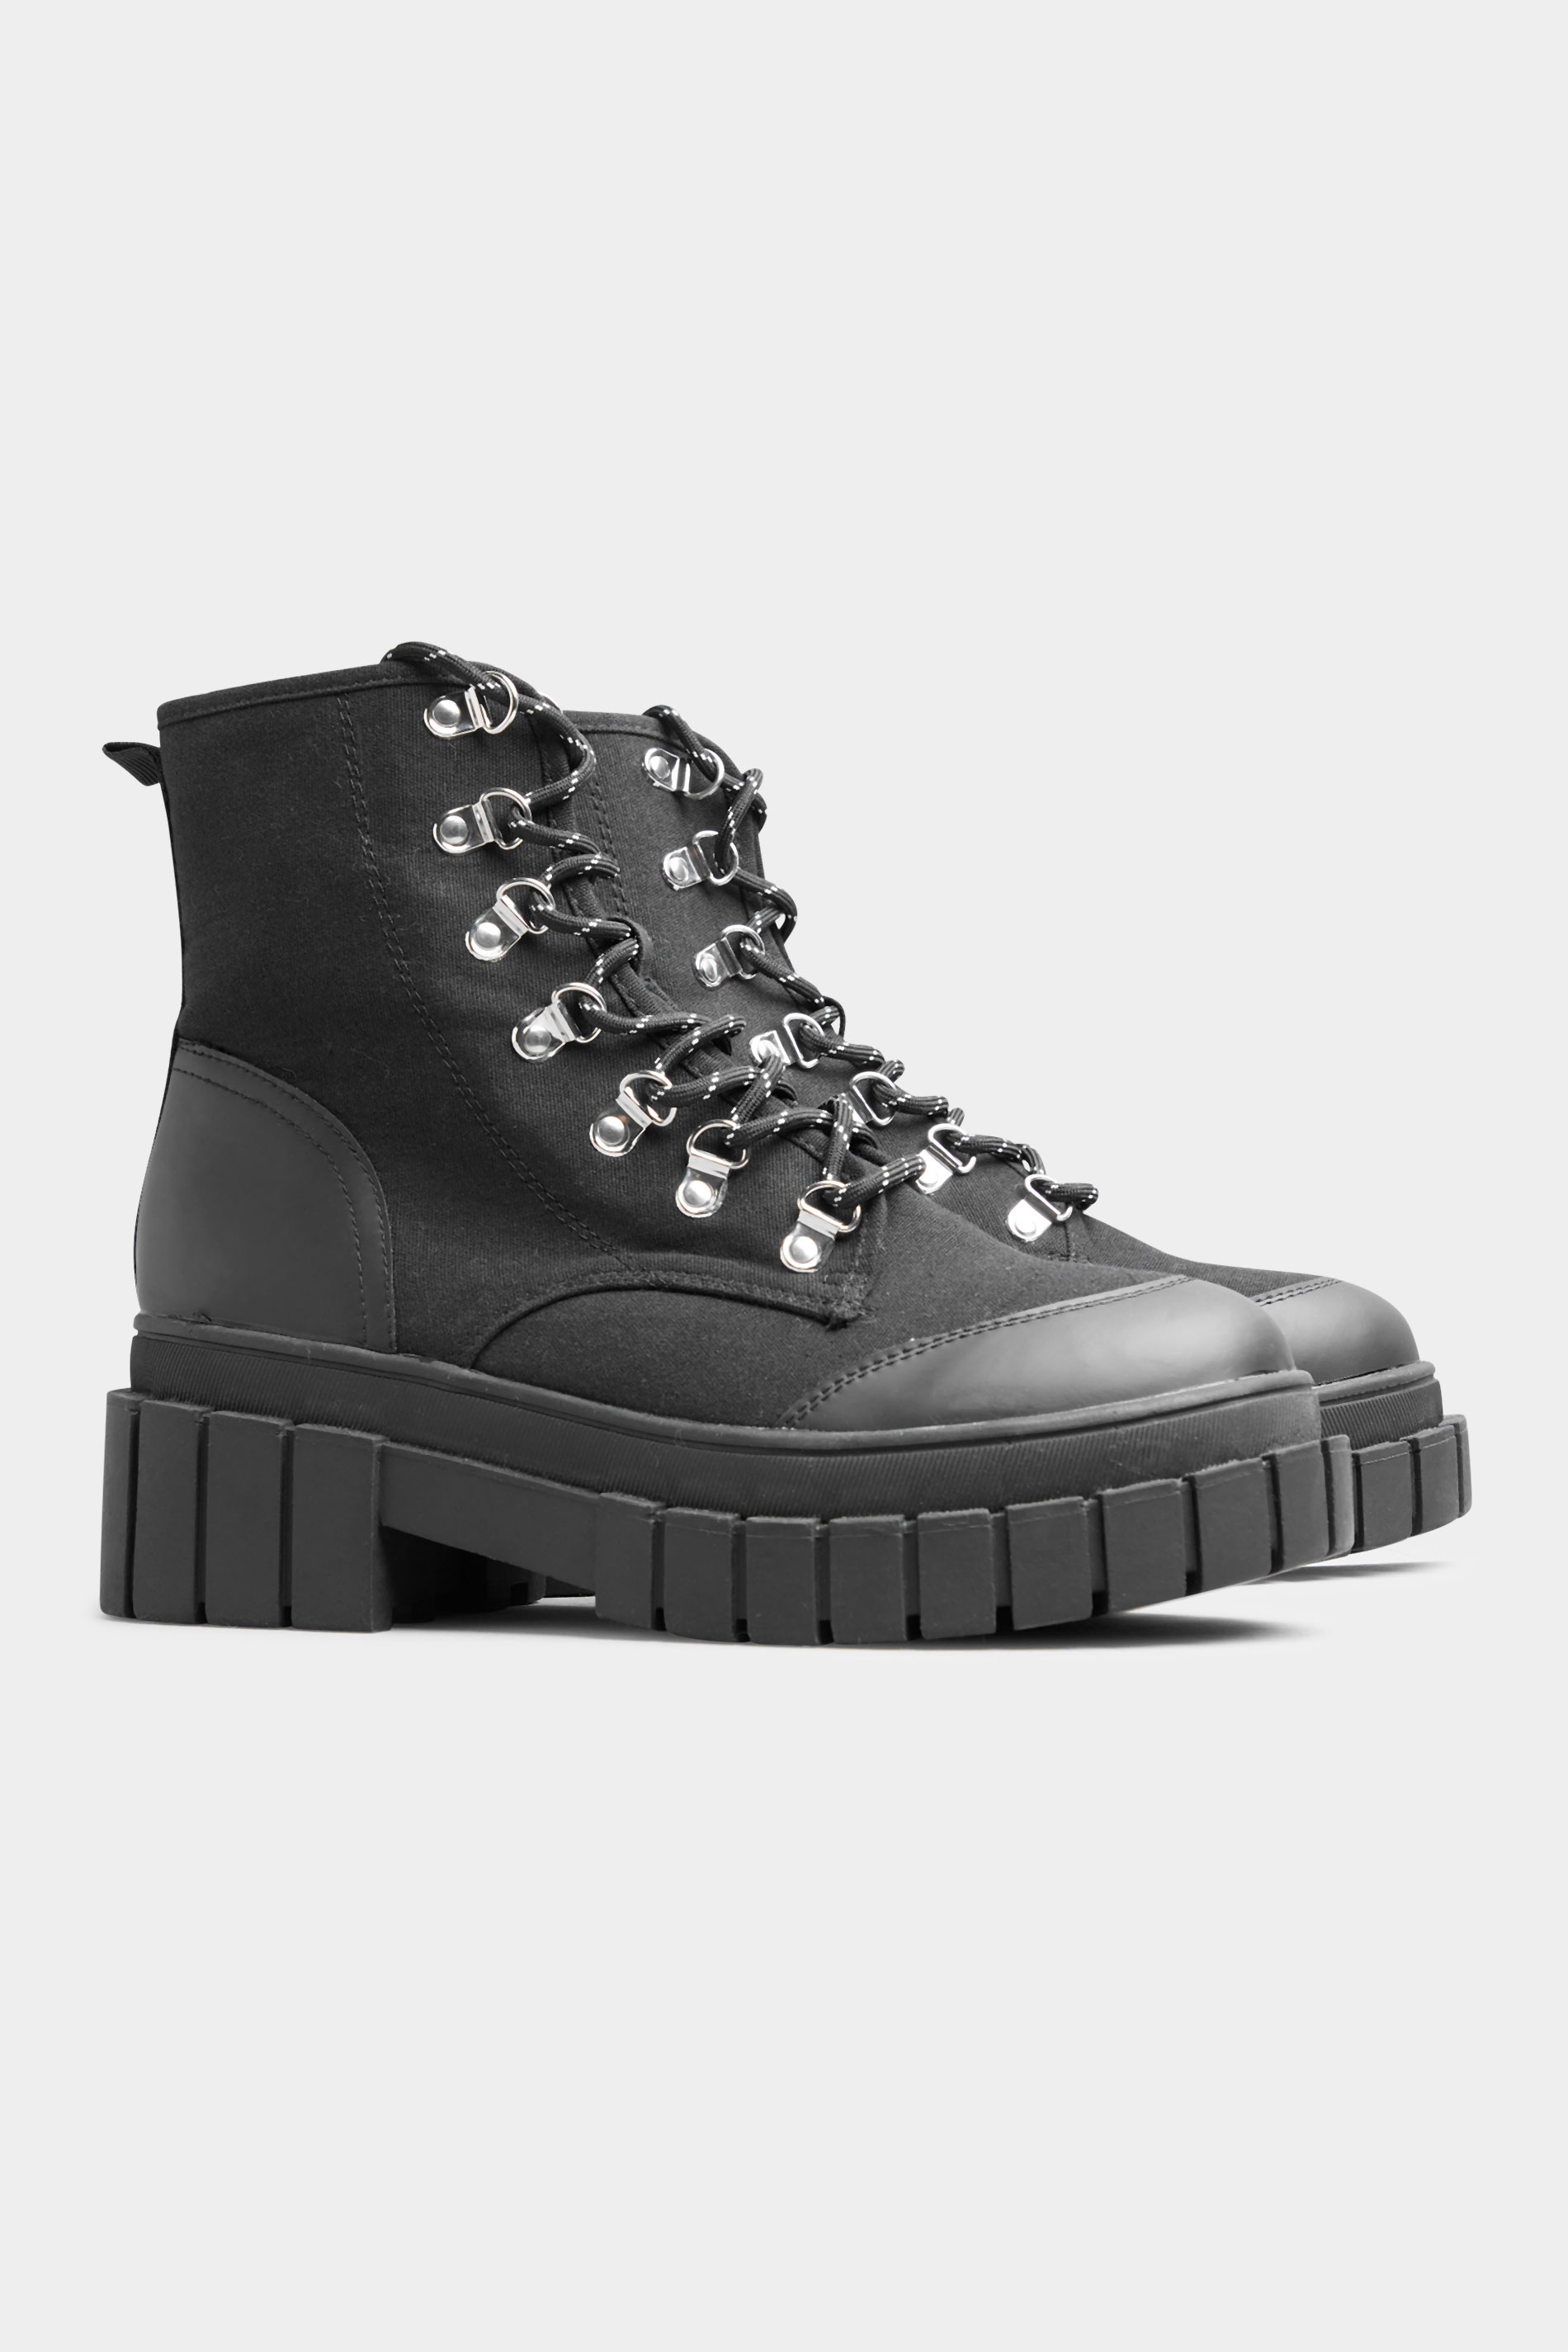 LIMITED COLLECTION Black Canvas Chunky Combat Boots In Wide Fit_D.jpg